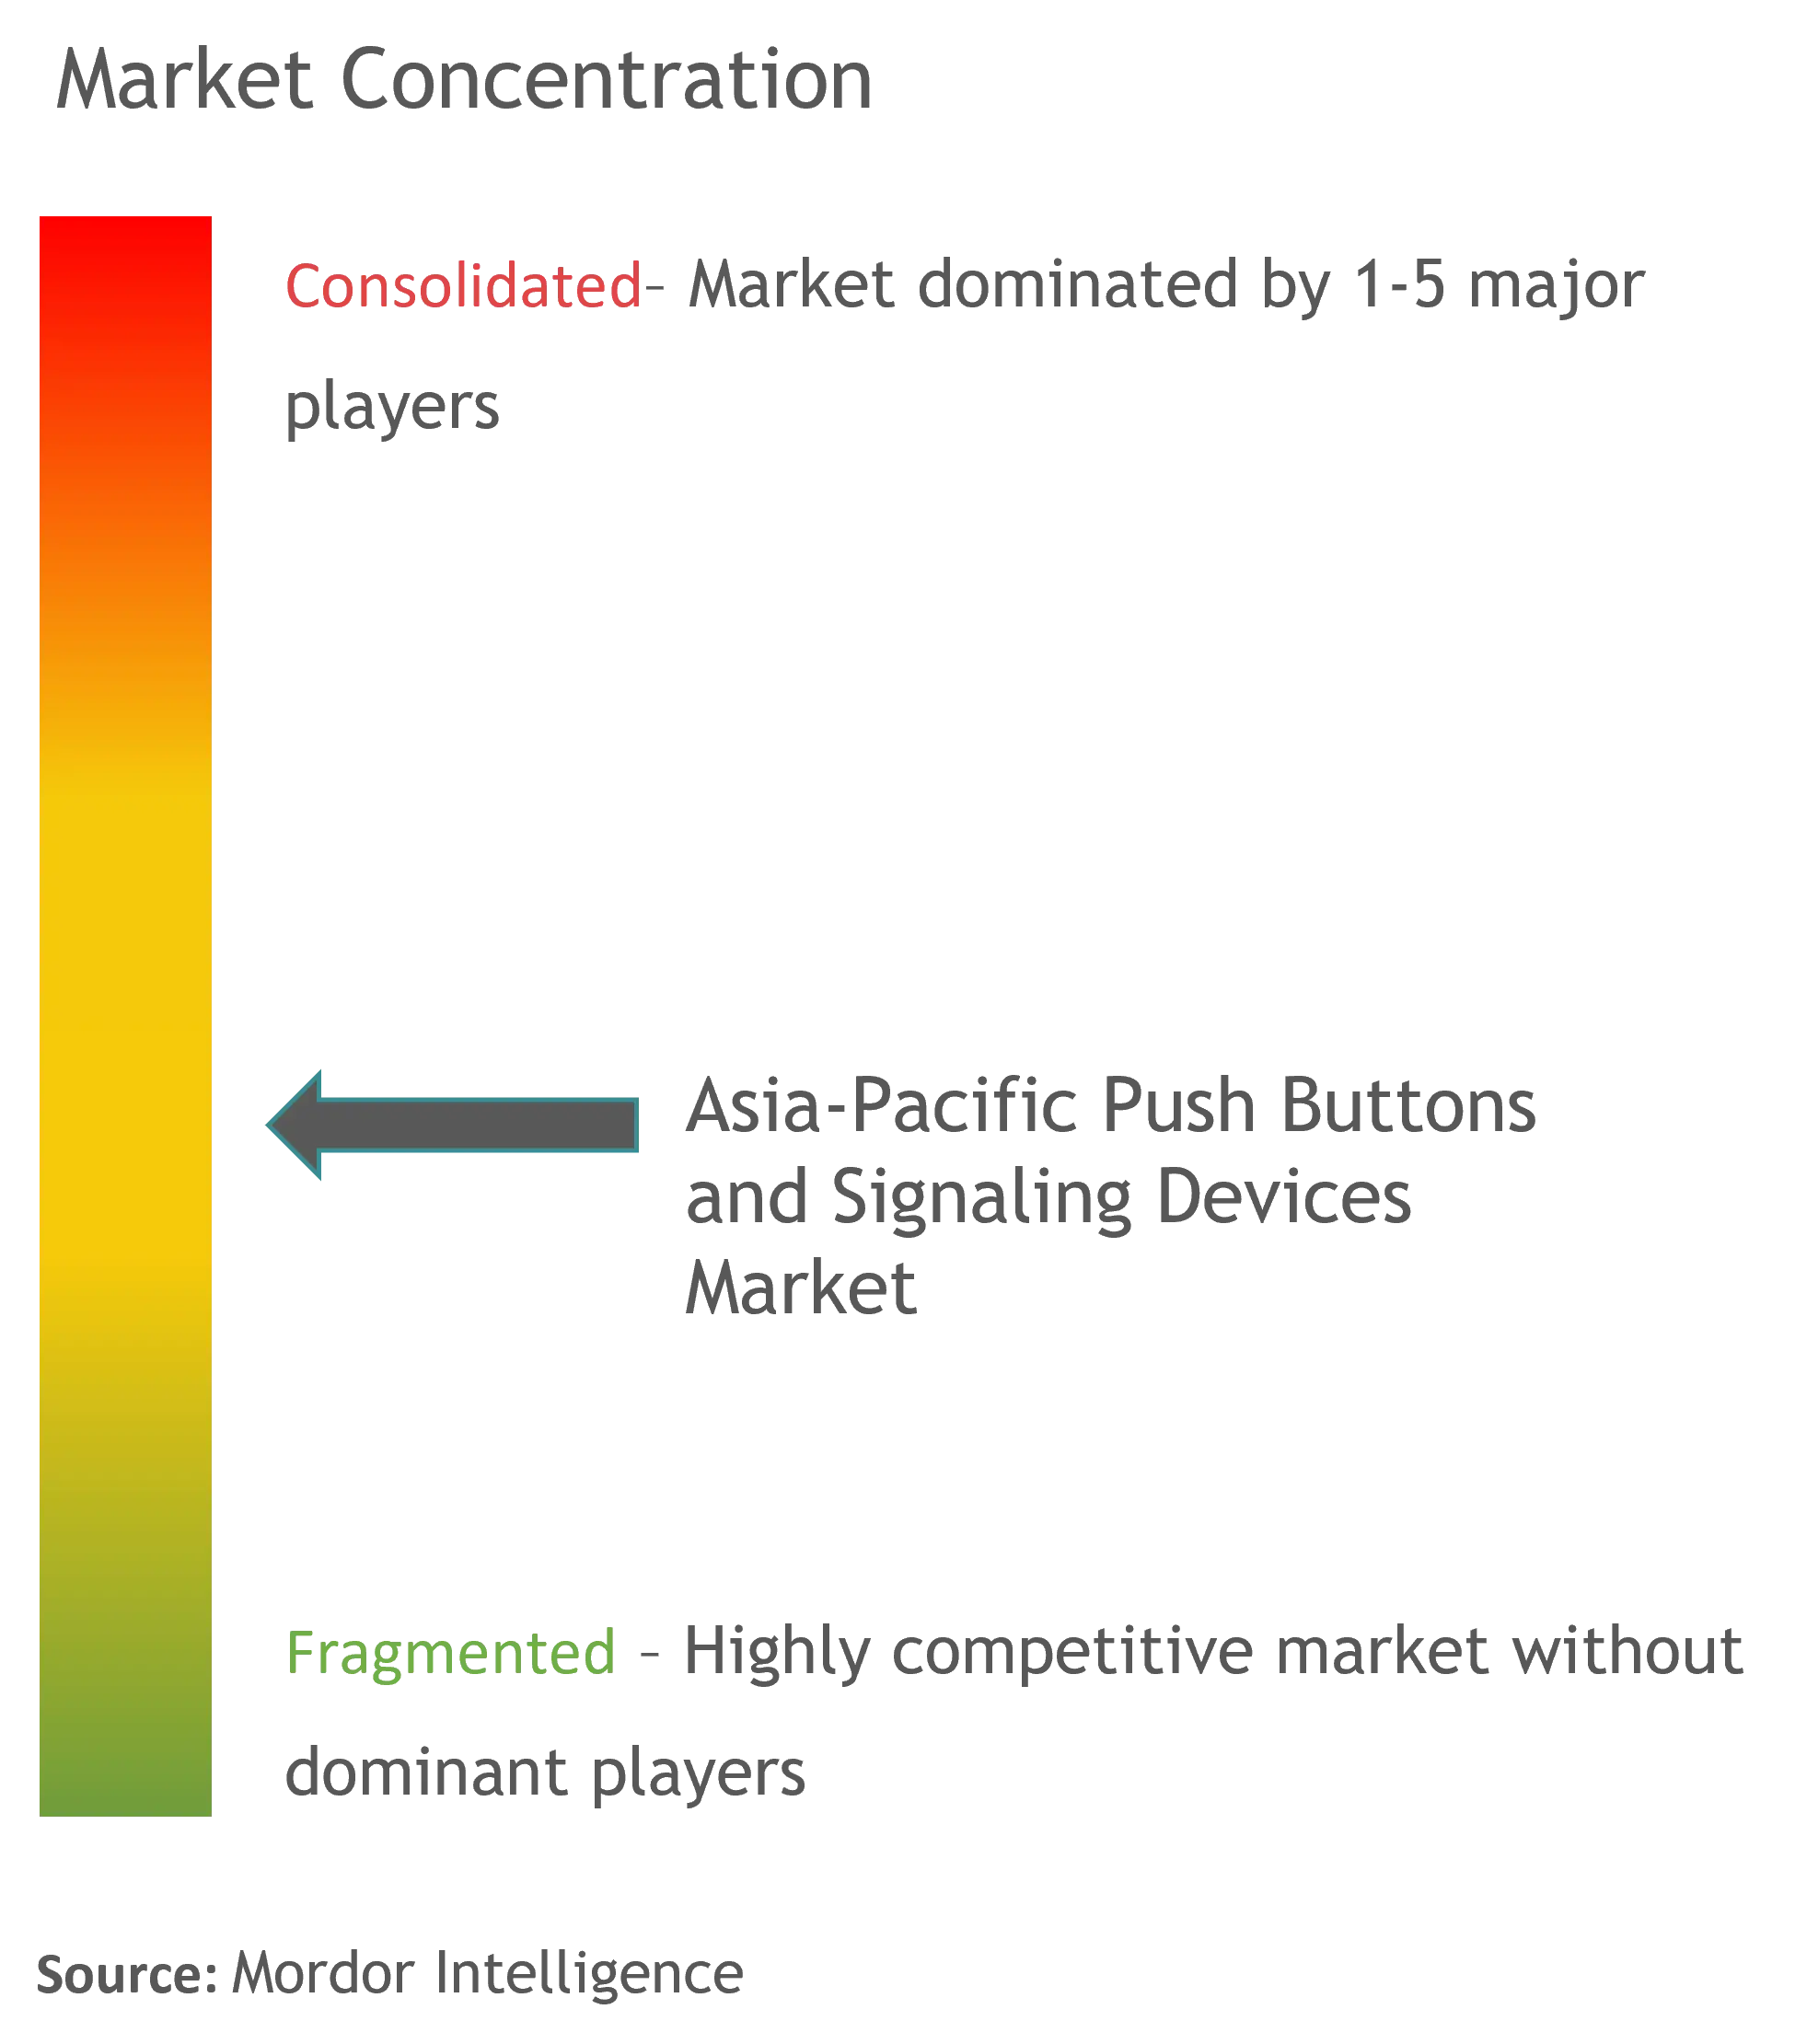 APAC Push Buttons and Signaling Devices Market Concentration